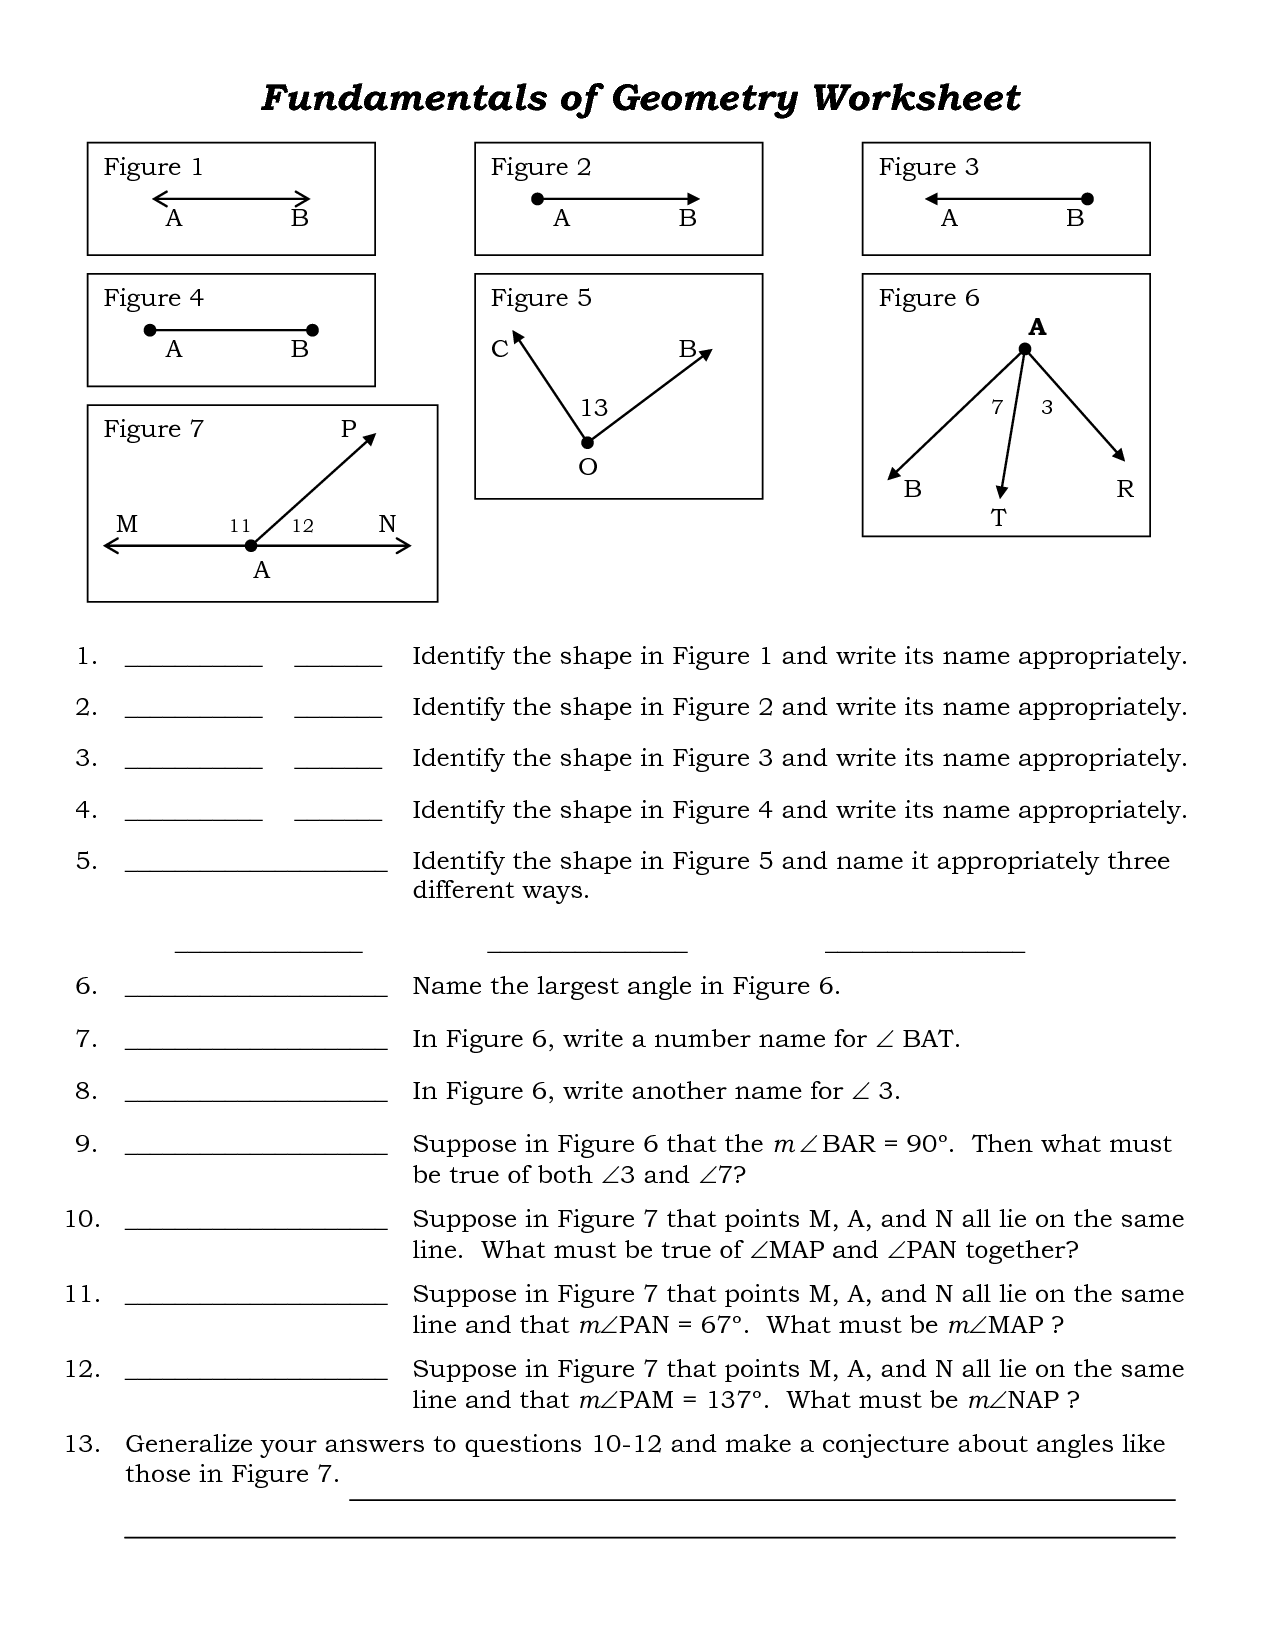 7-best-images-of-printable-worksheets-for-high-school-students-high